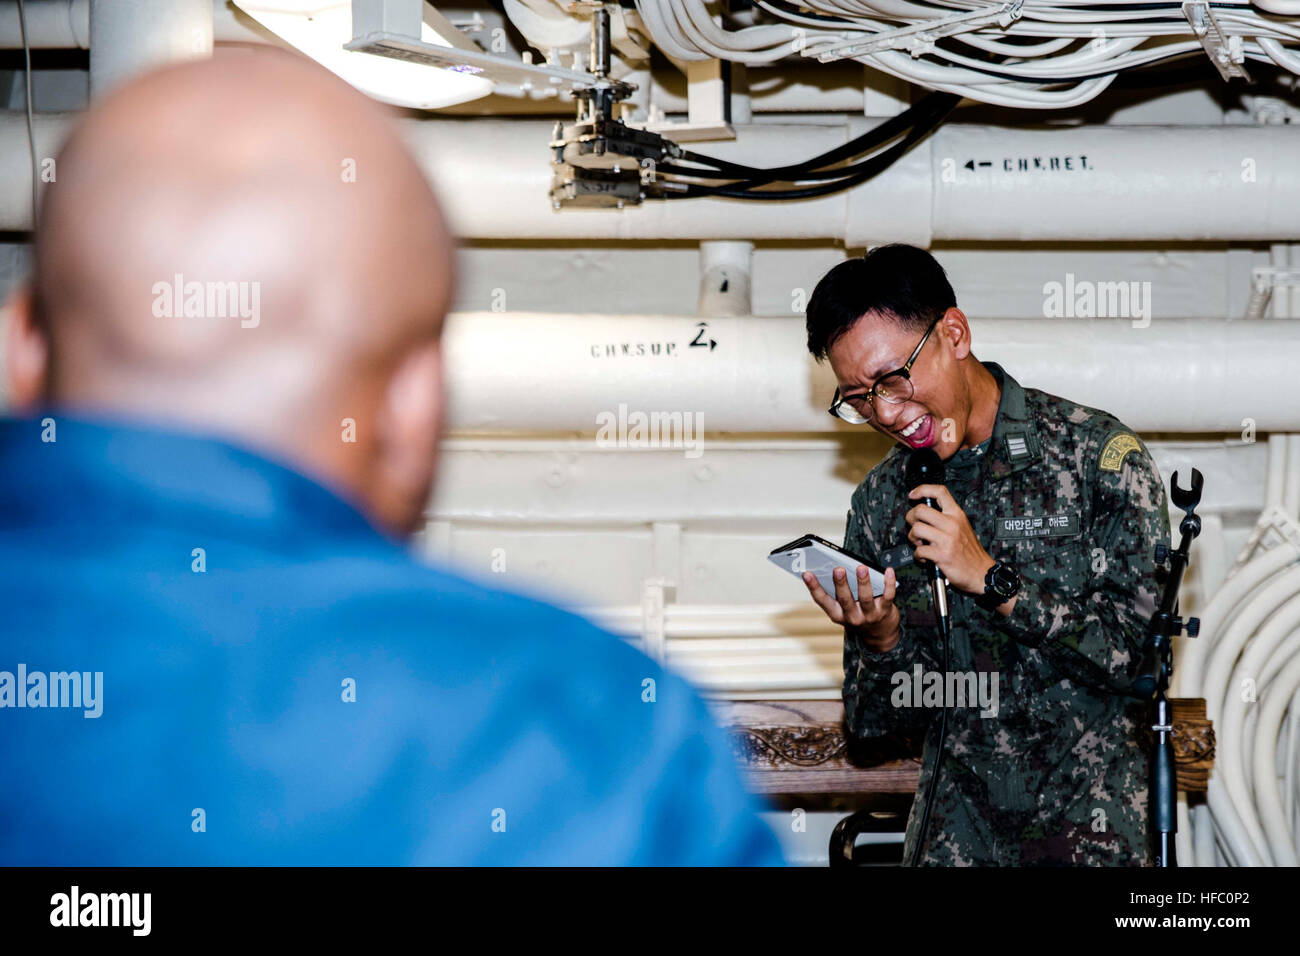 WATERS OUTSIDE OF OKINAWA (Aug. 12, 2016) Republic of Korea (ROK) Midshipman In Woo Song sings a song during Open Mic Night aboard the amphibious transport dock ship USS Green Bay (LPD 20). Green Bay, part of the Bonhomme Richard Expeditionary Strike Group, is operating in the U.S. 7th Fleet area of operations in support of security and stability in the Indo-Asia-Pacific region. (U.S. Navy photo by Mass Communication Specialist 1st Class Chris Williamson/Released) Green Bay Underway 160812-N-JH293-290 Stock Photo